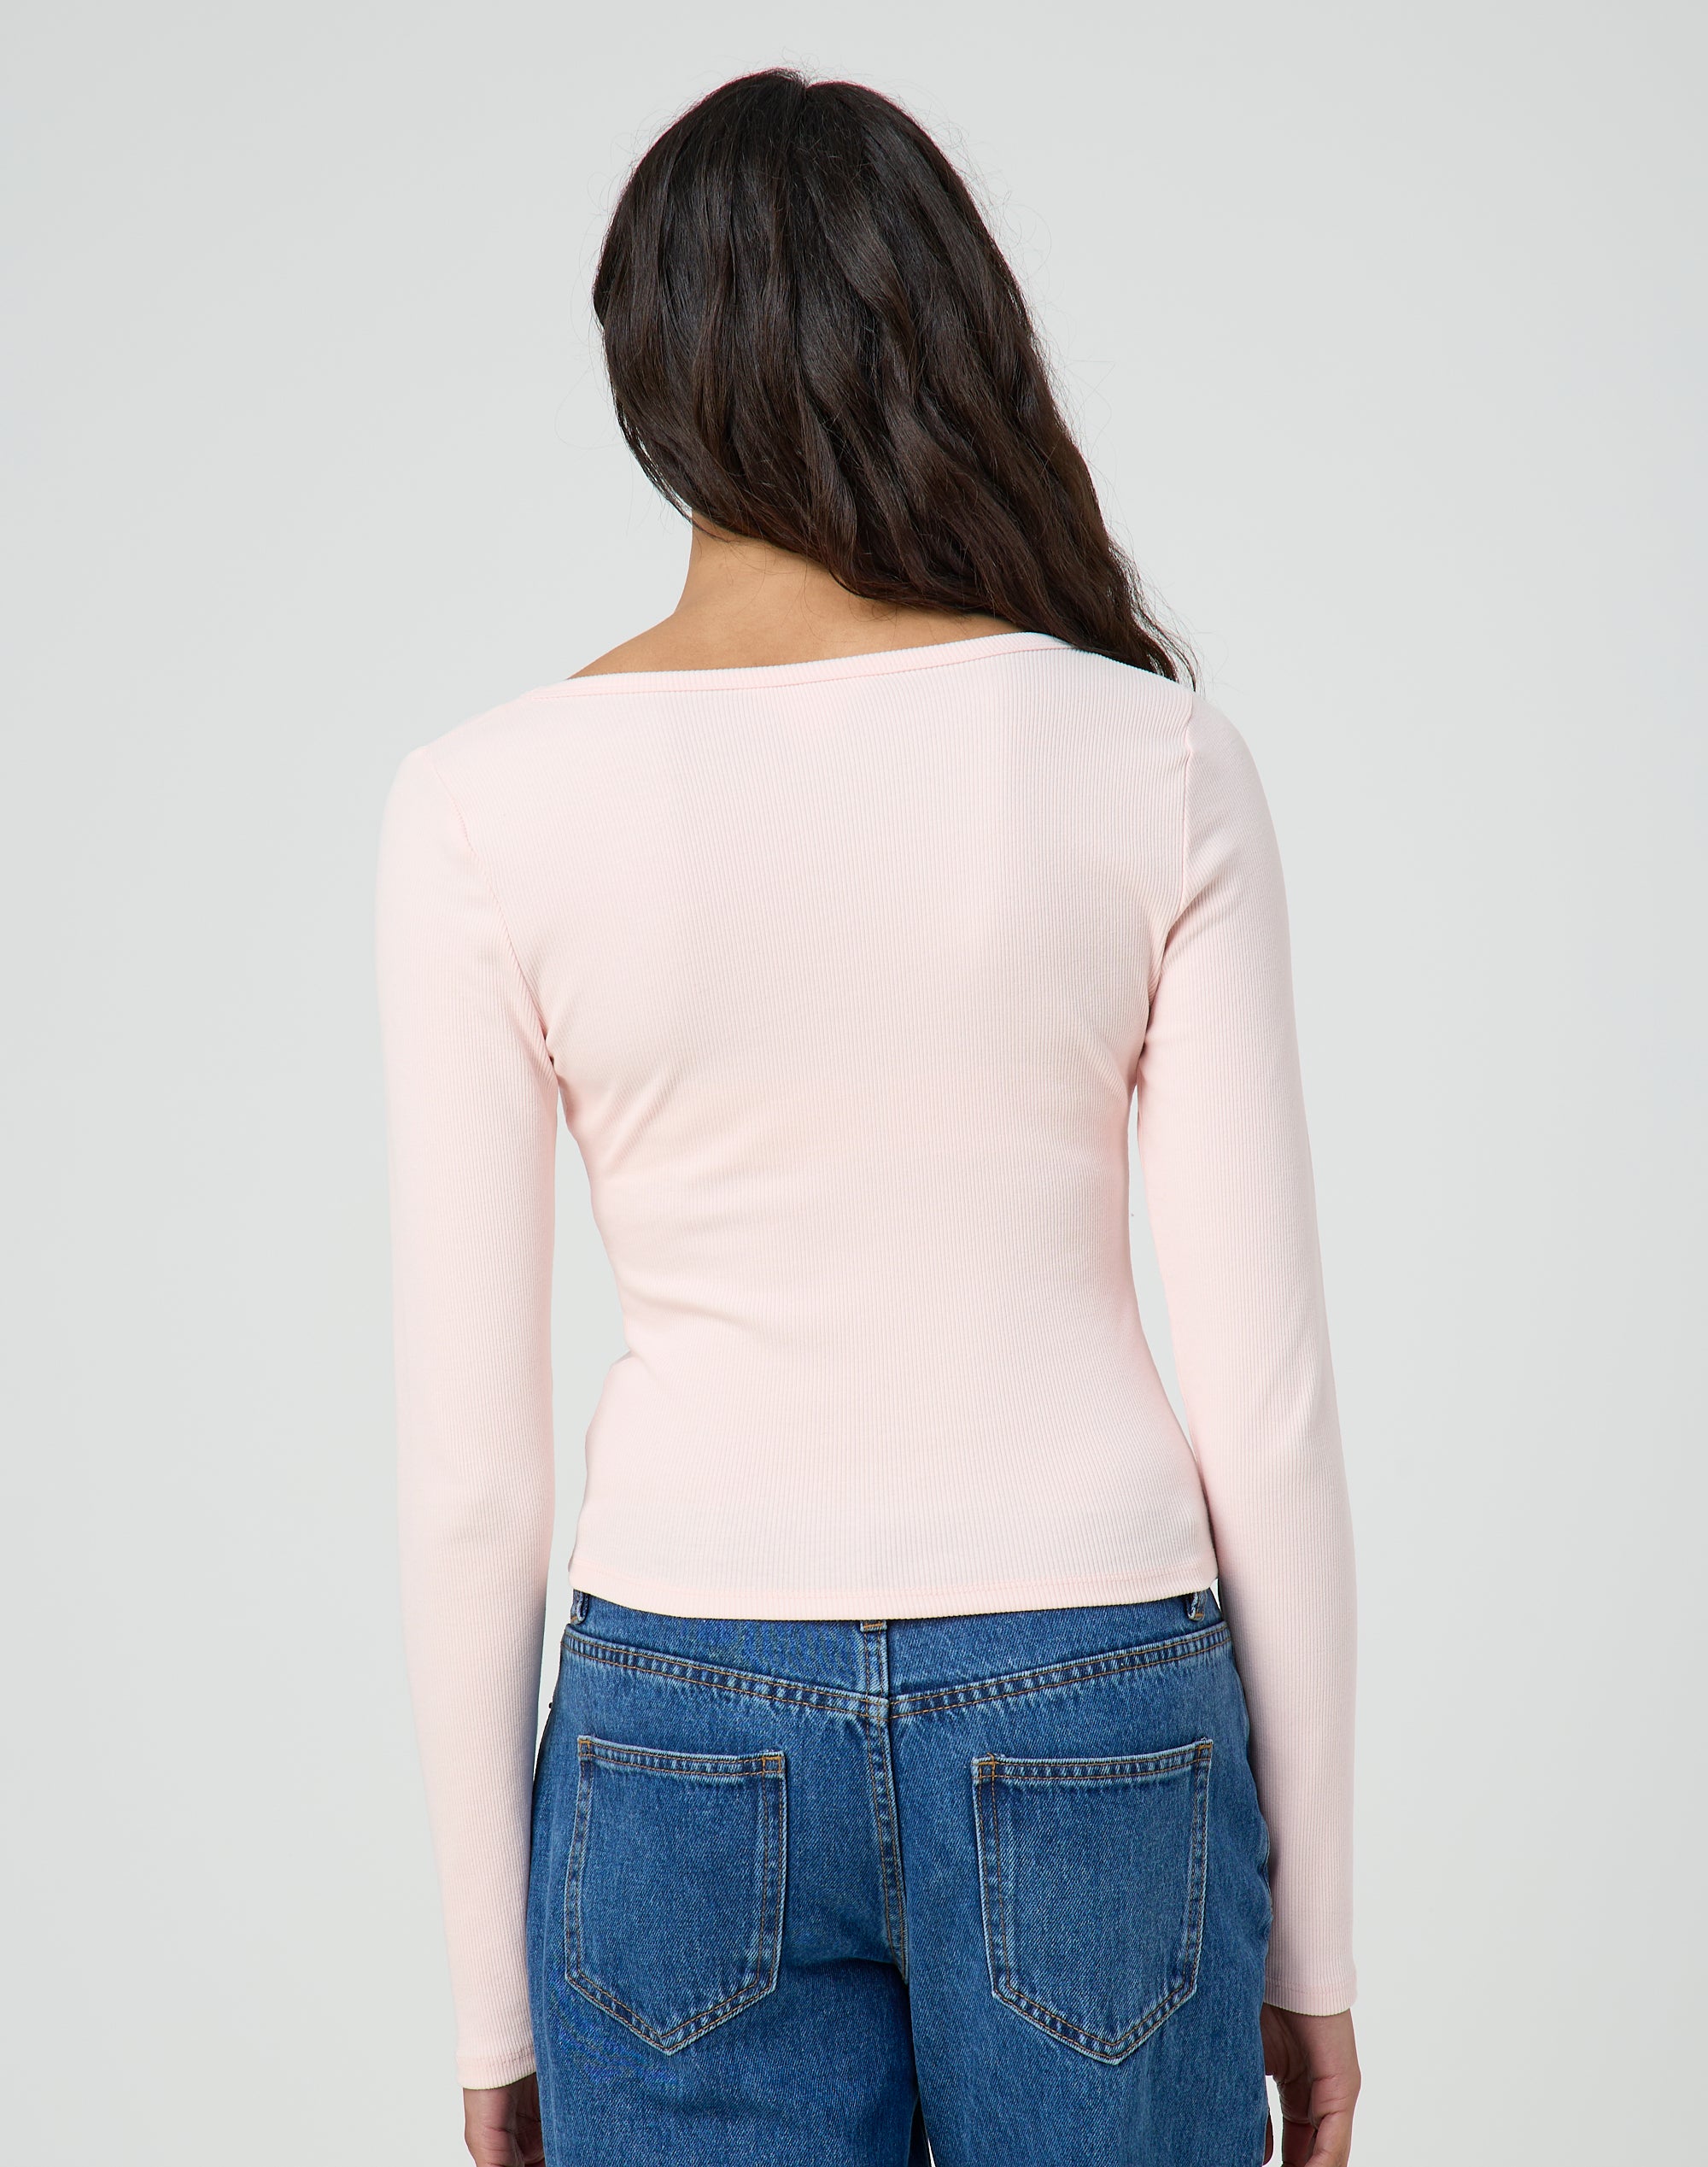 Ribbed Scoop Neck Long Sleeve Top in Stop Blushing